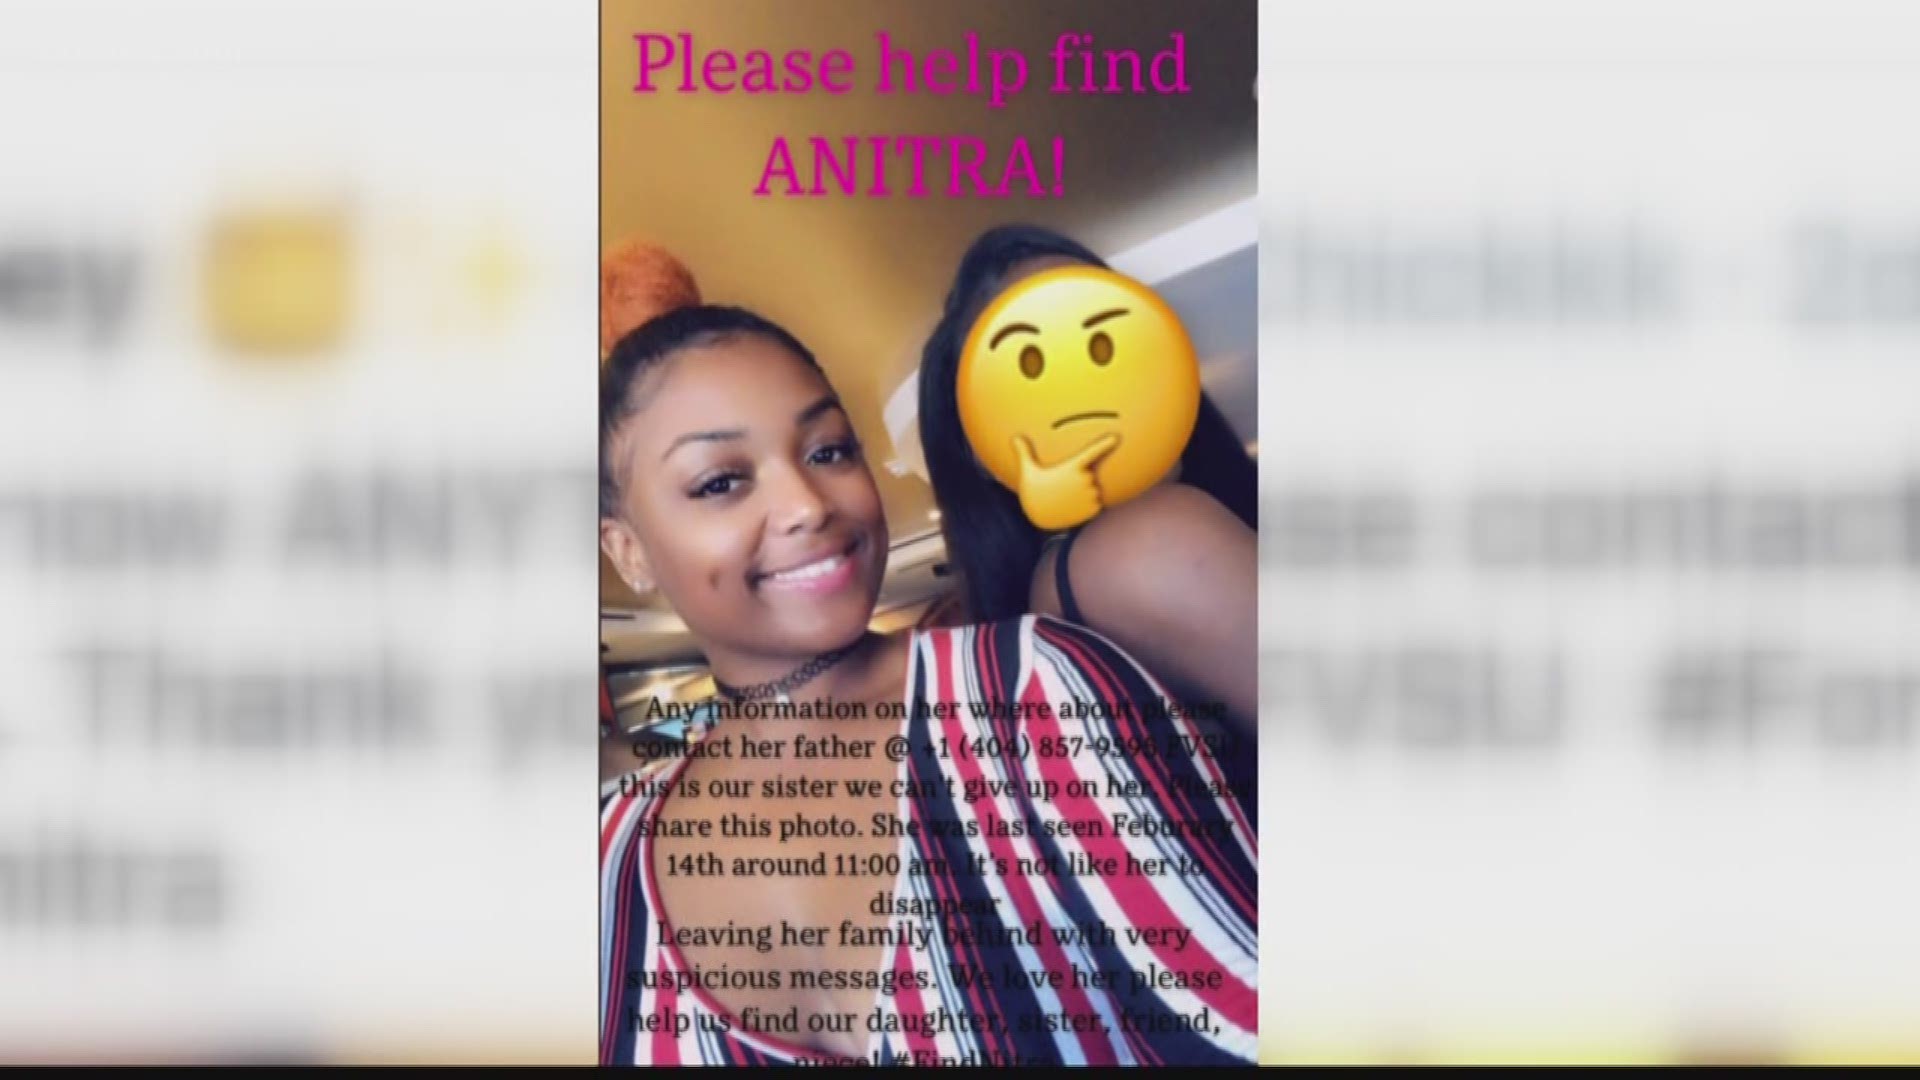 3 days after Anitra Gunn was last seen, a task force between Fort Valley Police,  Peach County Sheriff's Office, and the GBI was formed to find the missing student.